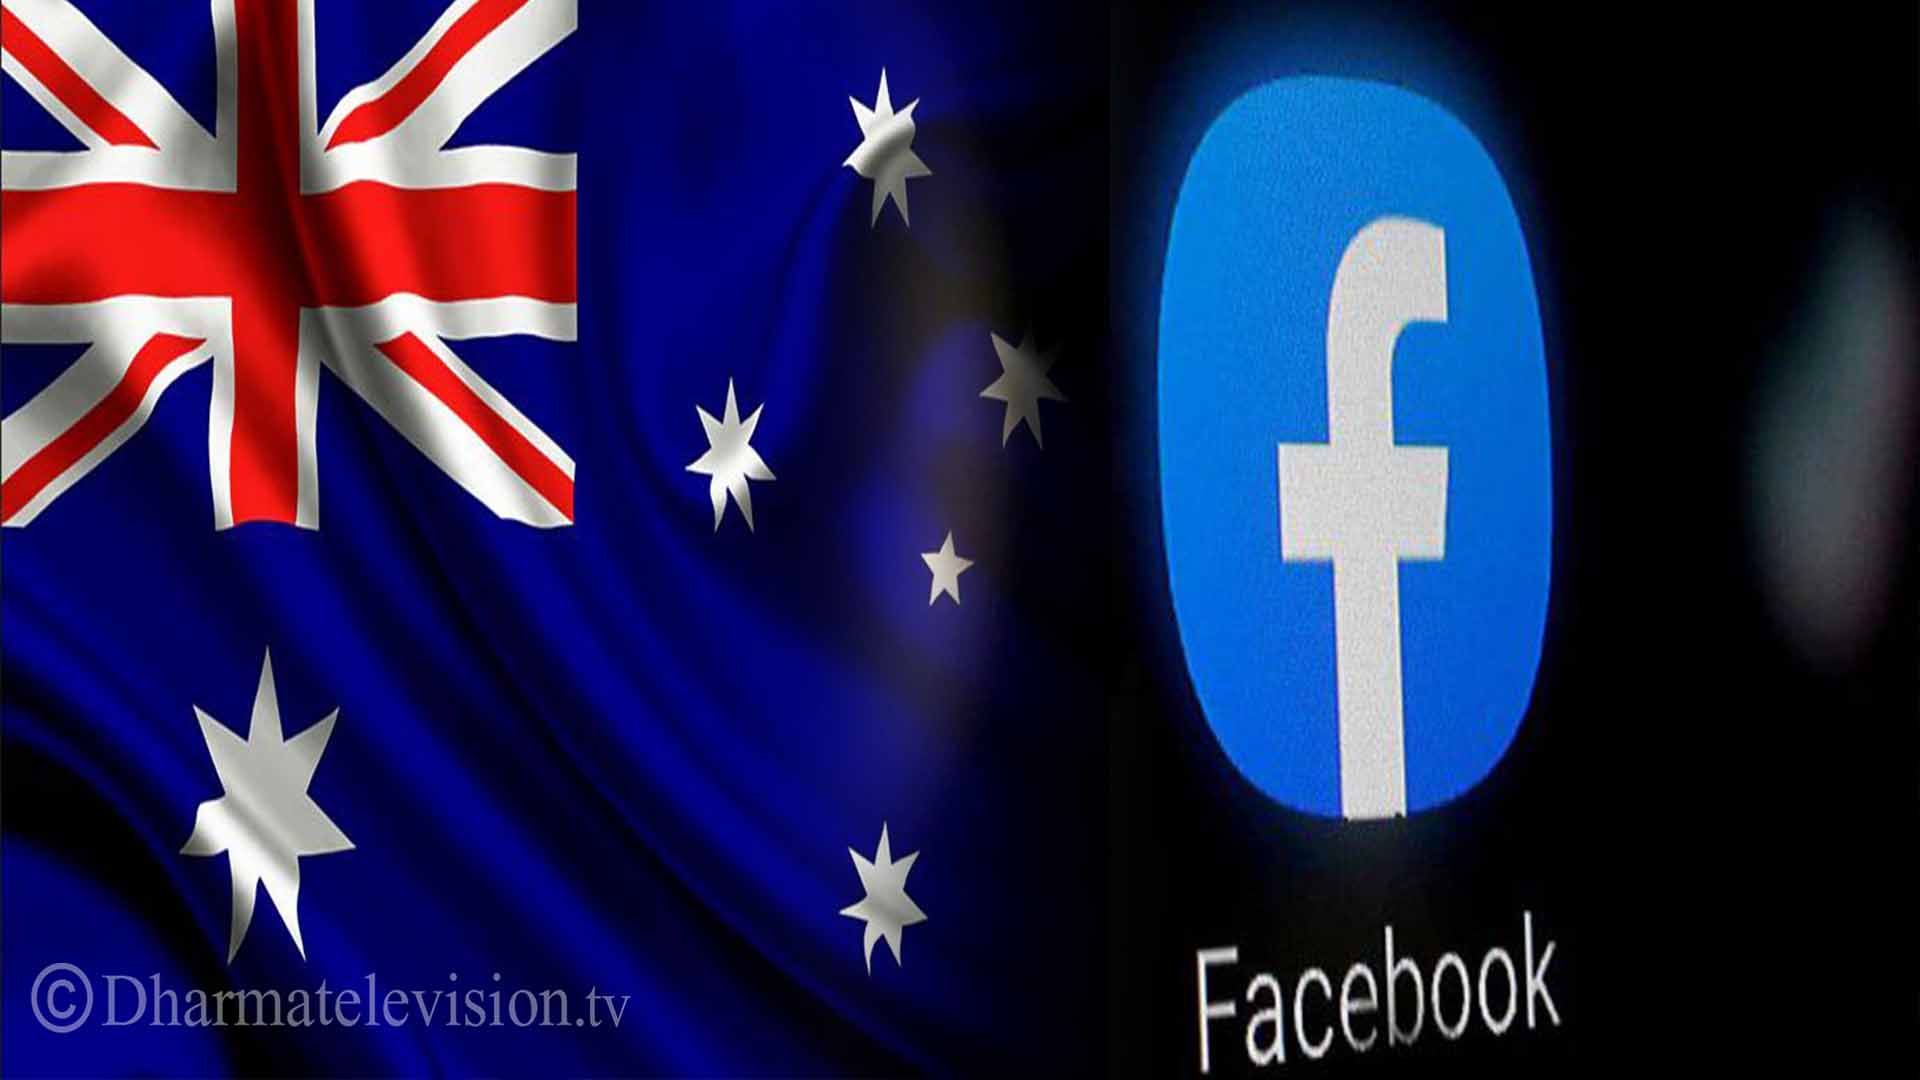 Facebook agrees to pay for news content in Australia